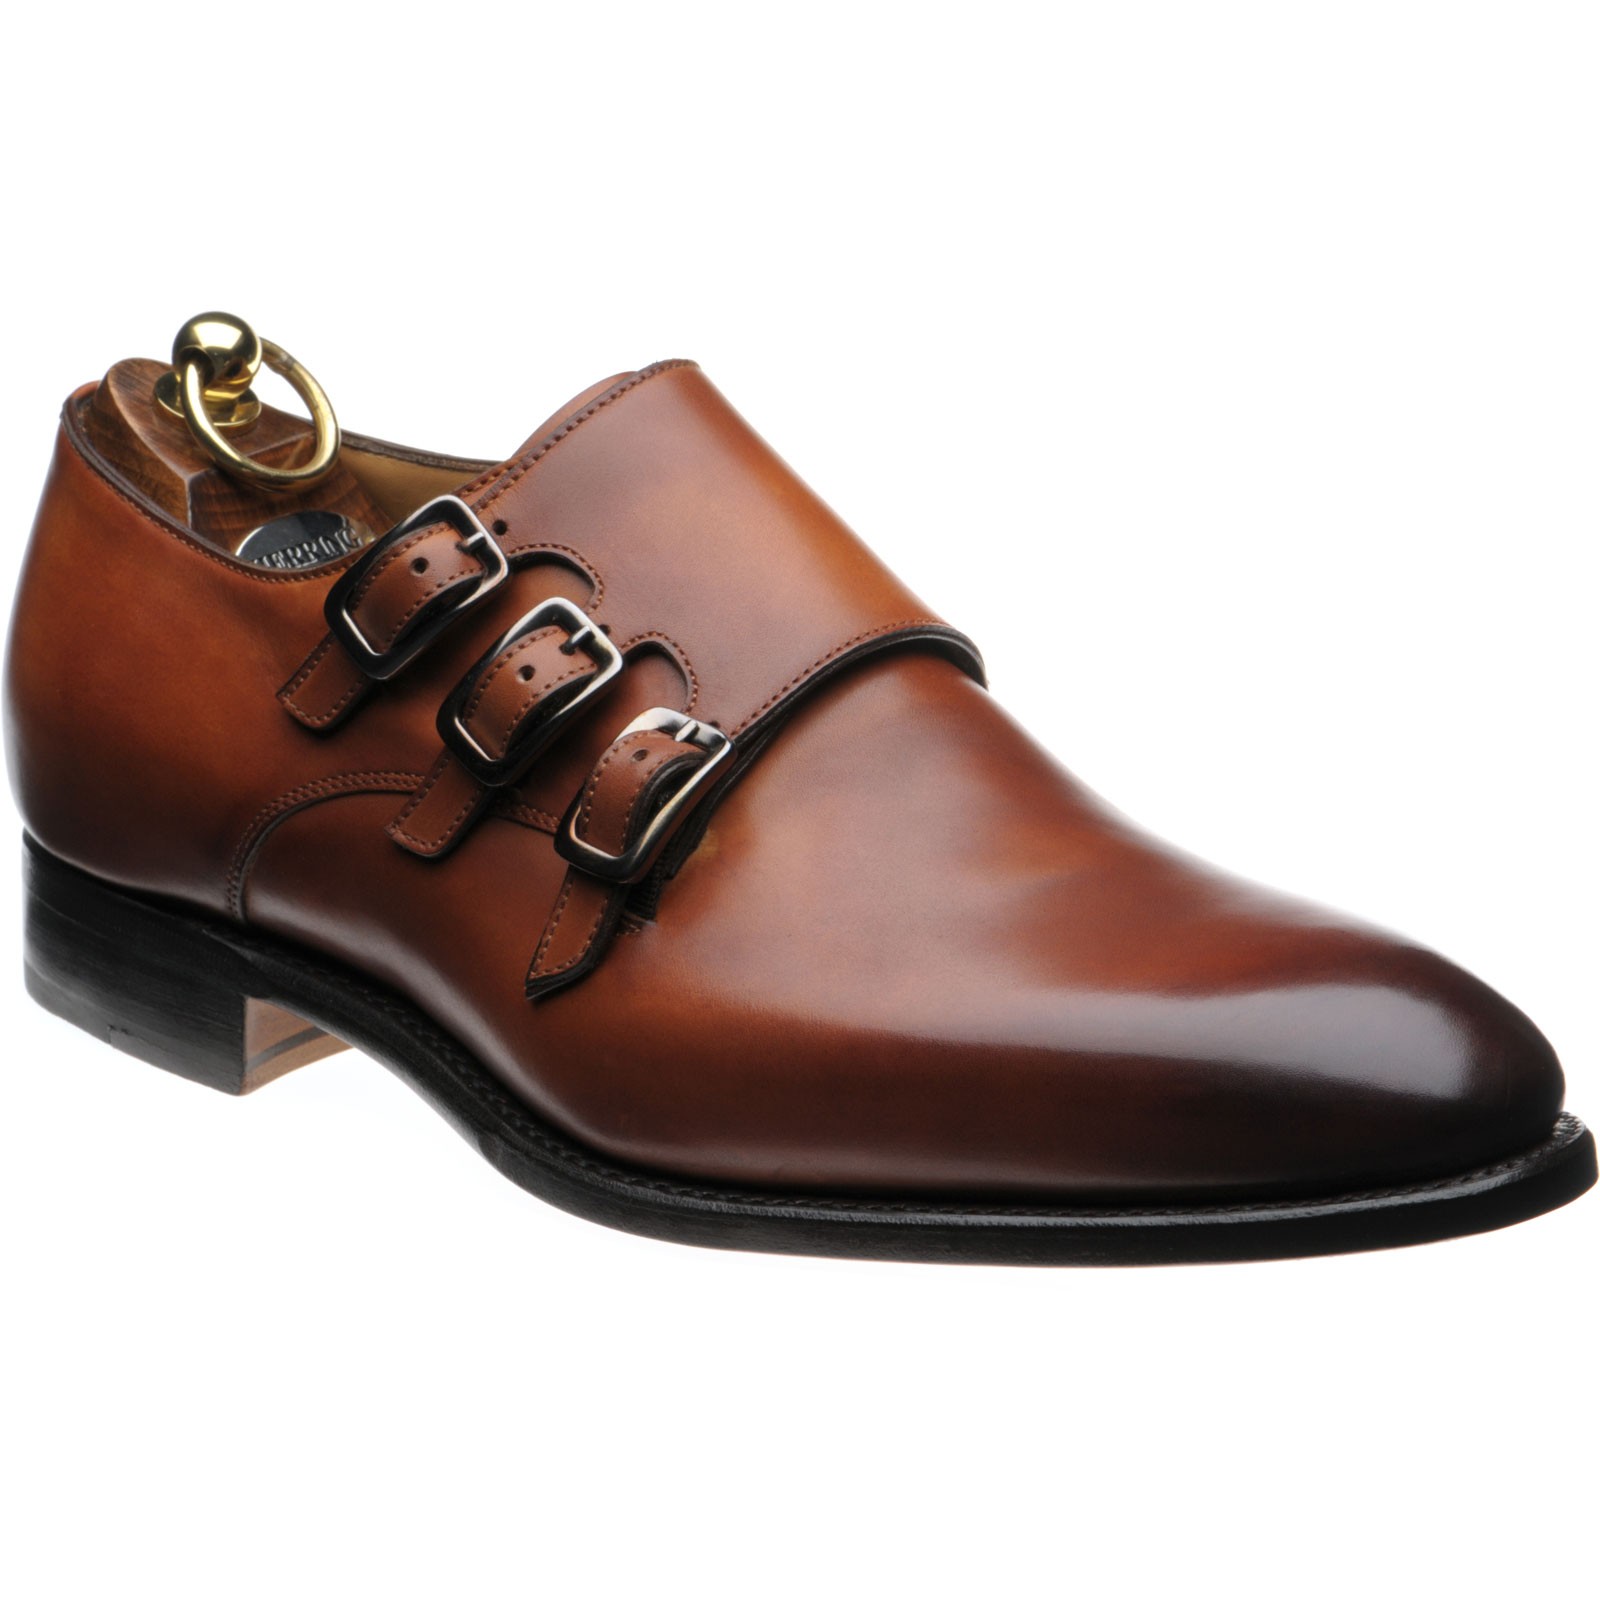 Herring shoes | Herring Classic | Dahl monk shoes in Chestnut Calf at ...